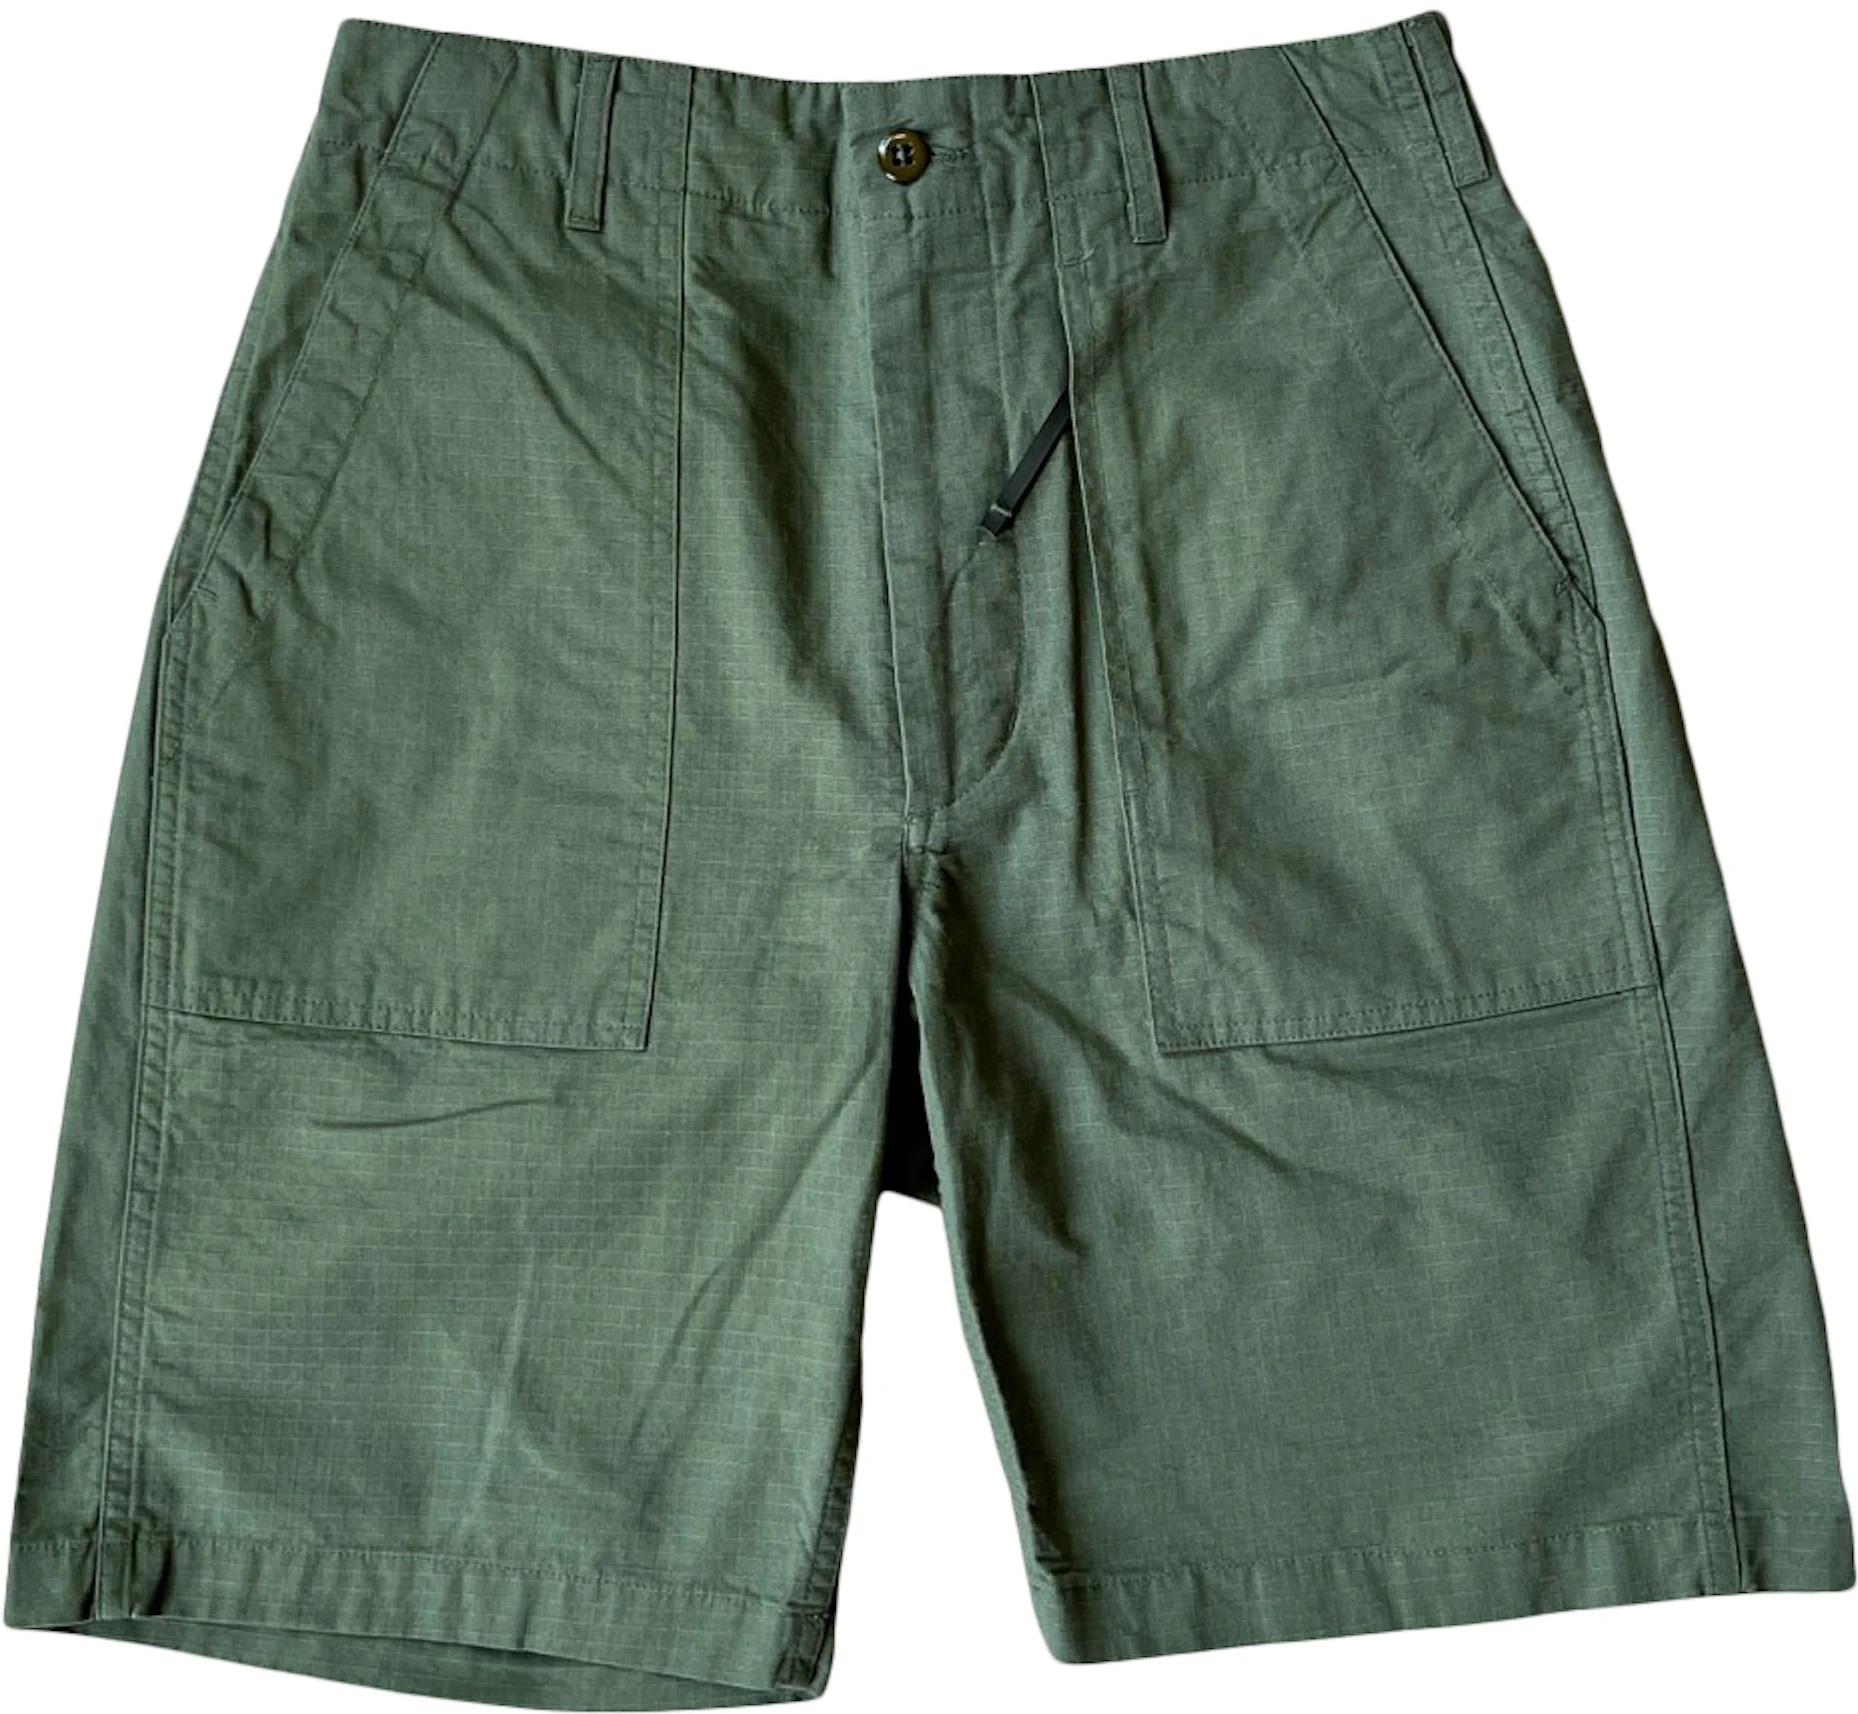 Engineered Garments Fatigue Cotton Ripstop Short Olive - SS22 - US